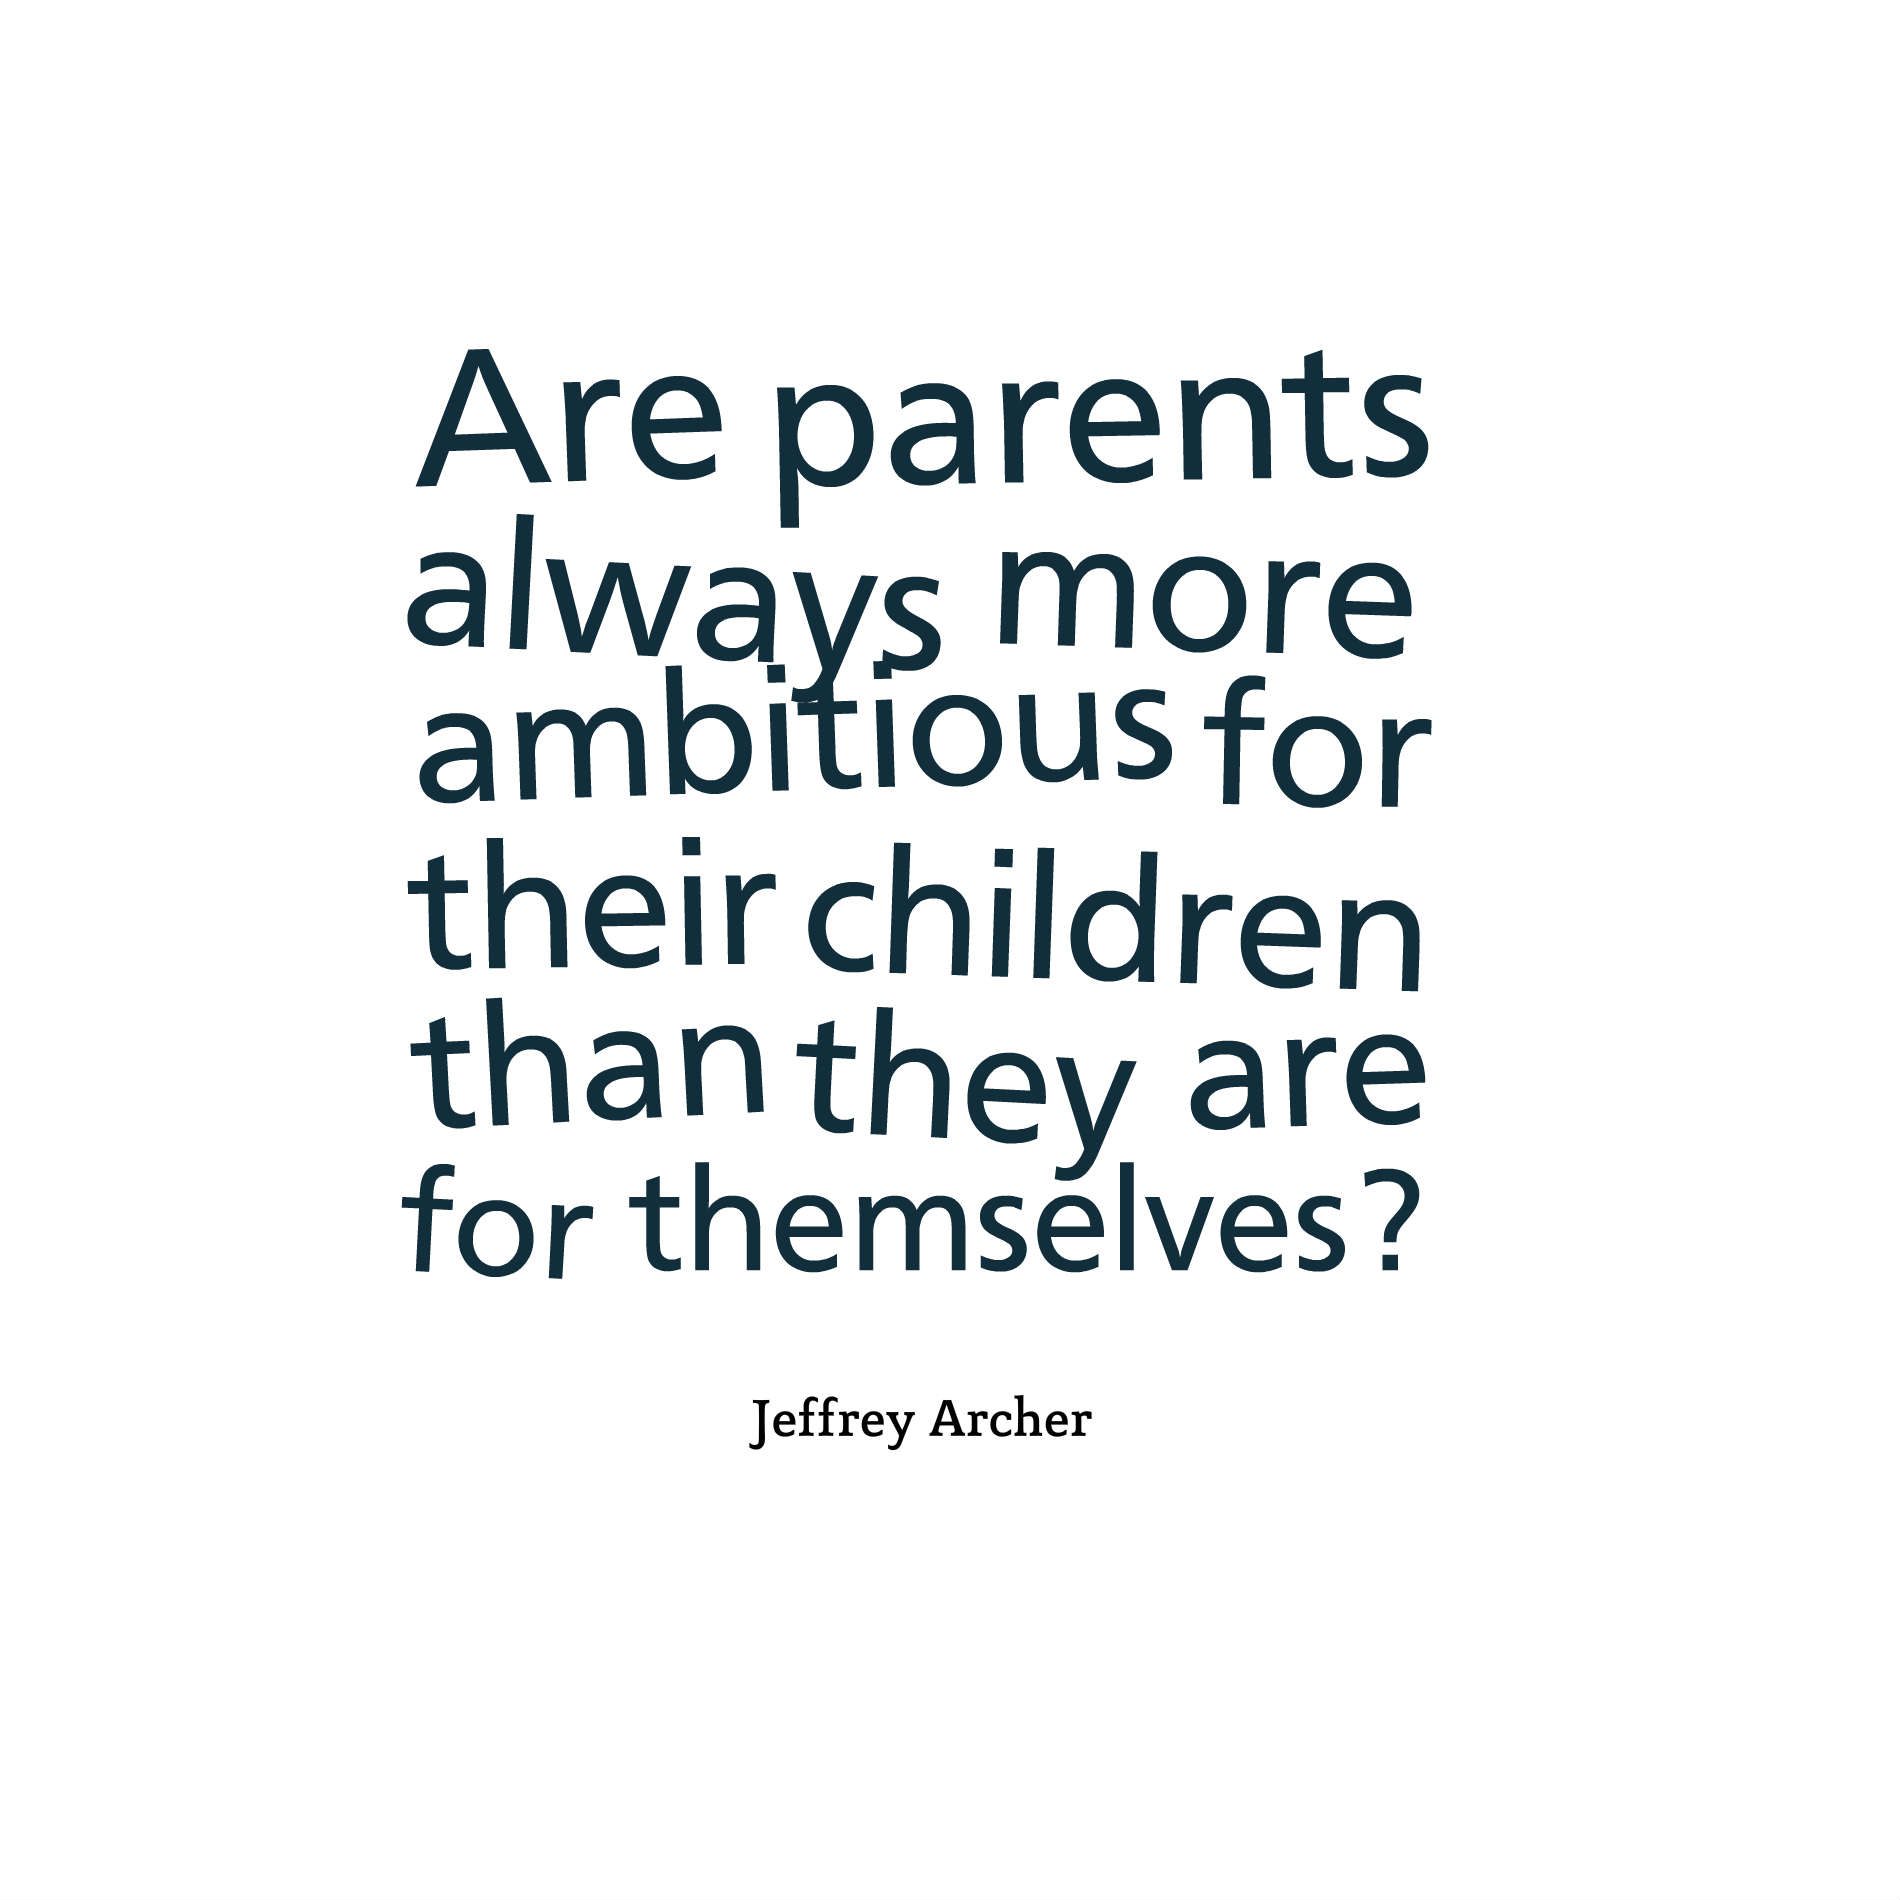 Are parents always more ambitious for their children than they are for themselves